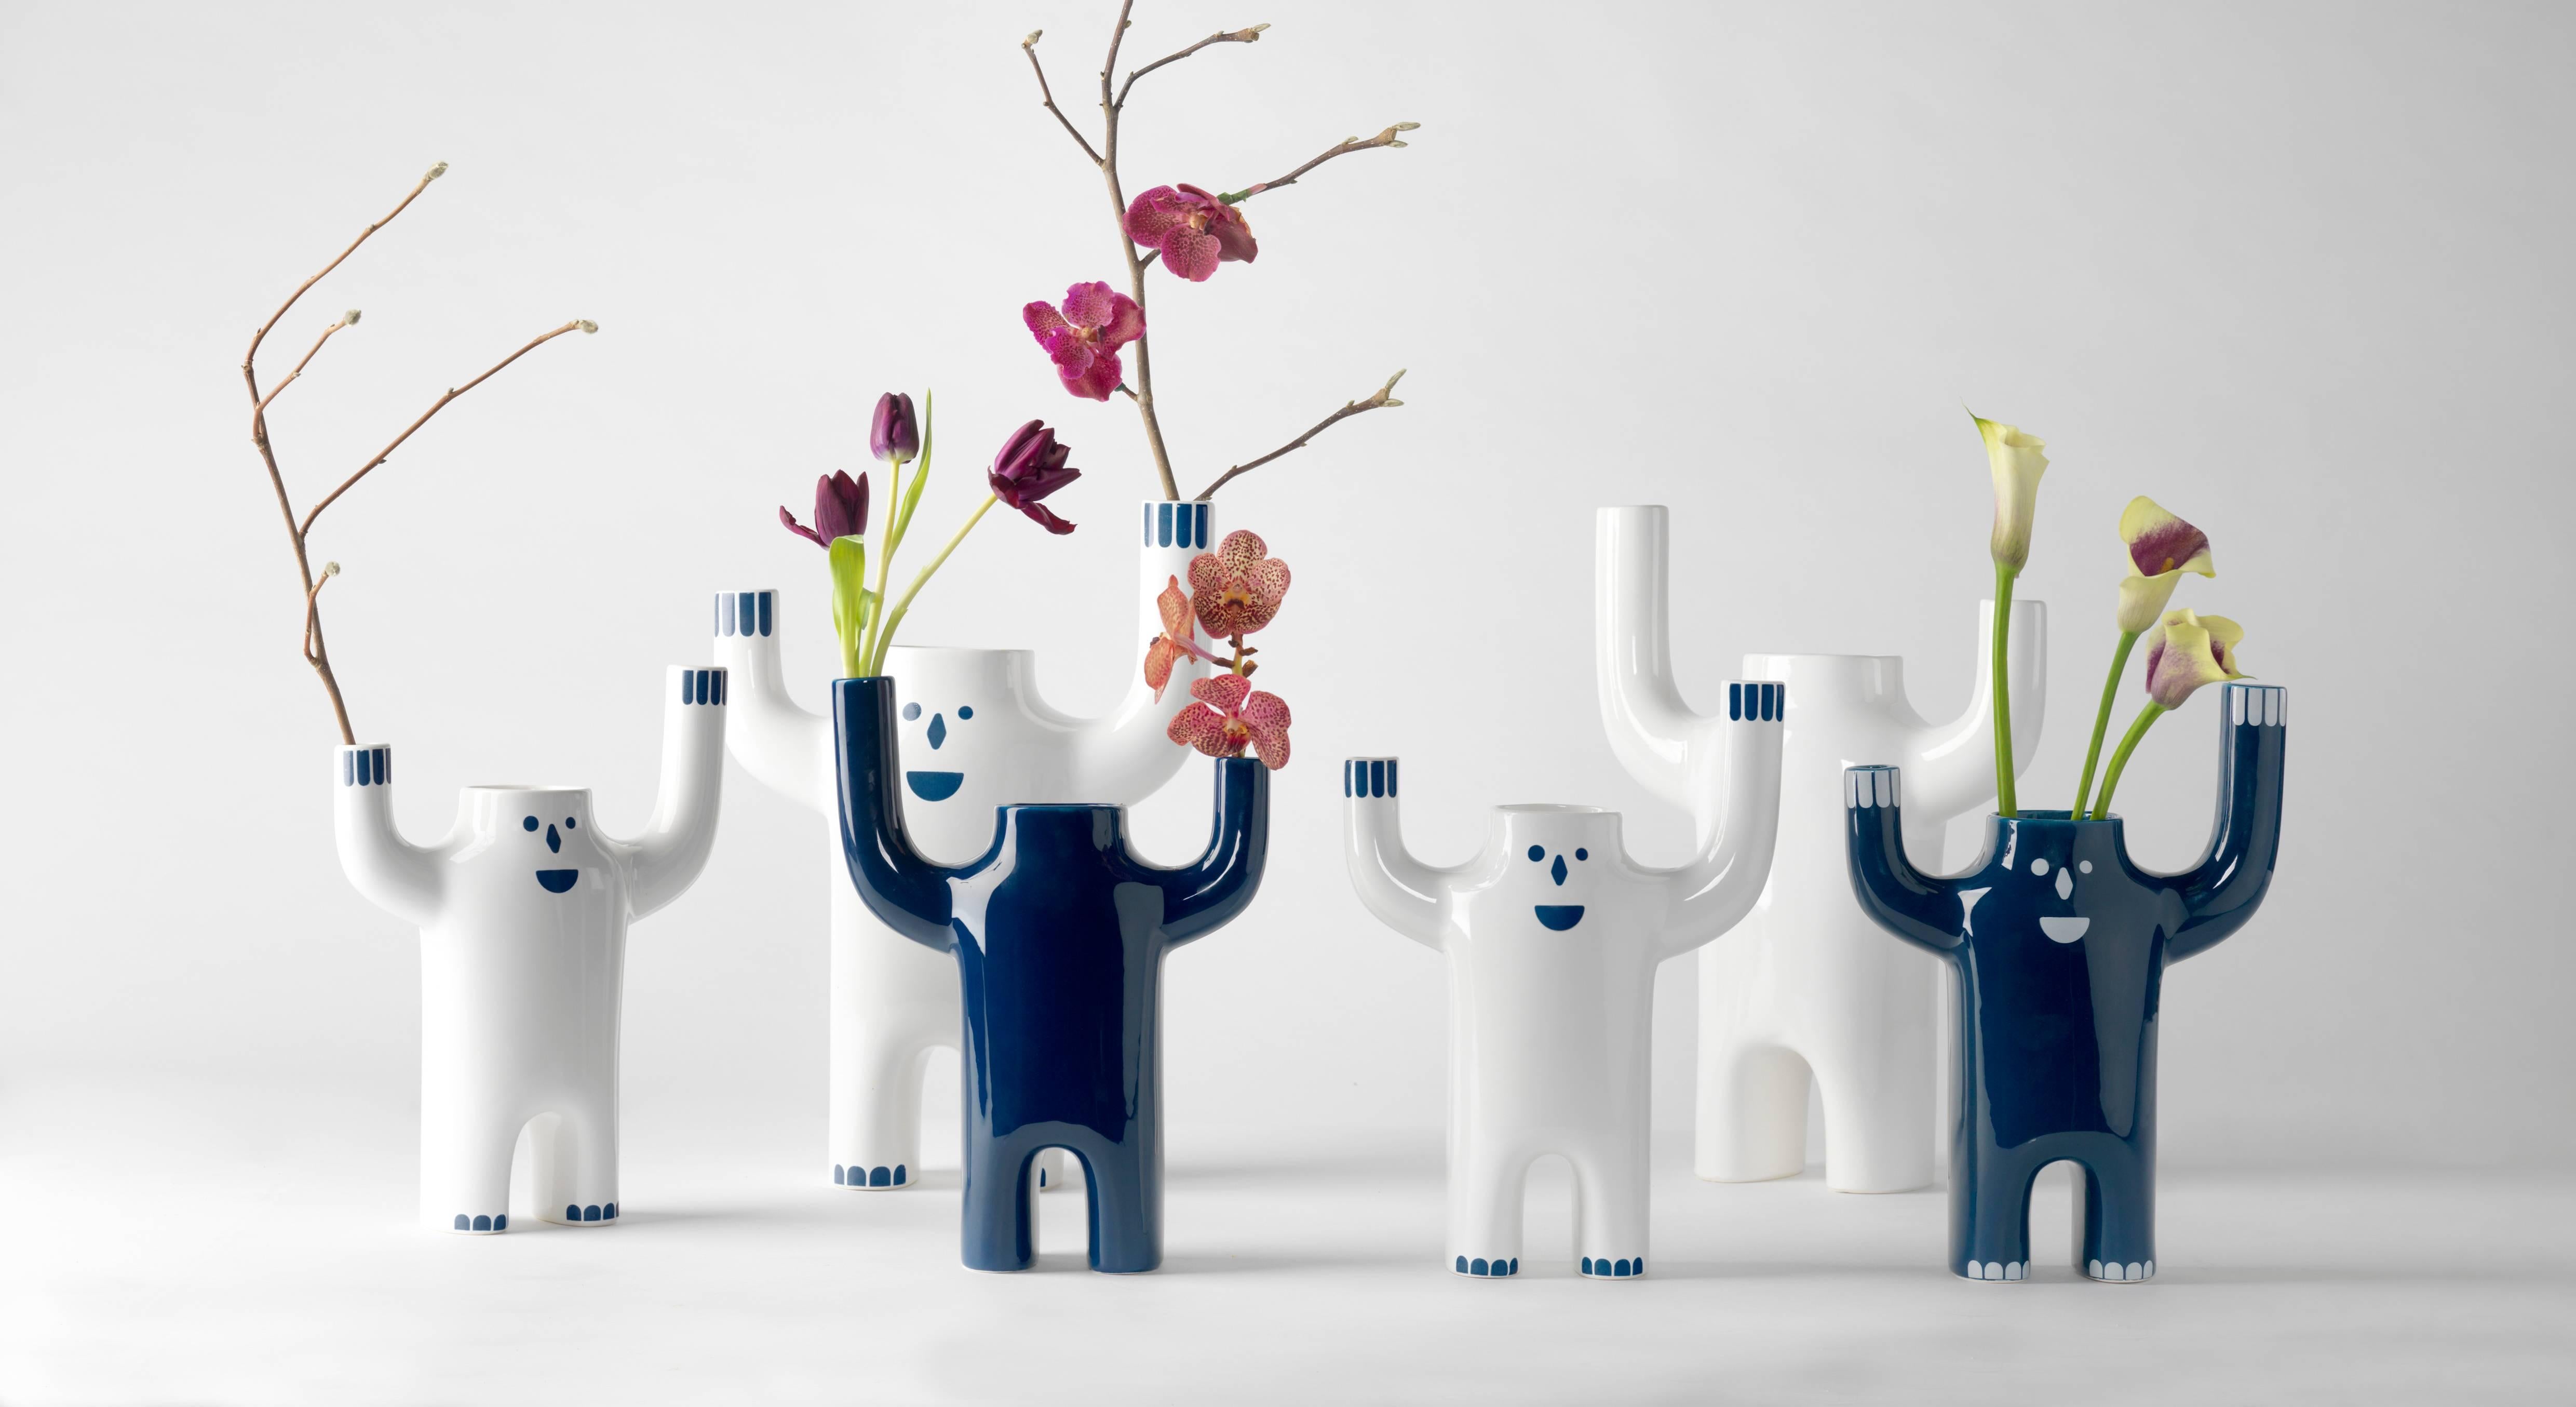 Glazed ceramic in white or blue with decorations in white or blue. One side with decoration, the other side without.

A ceramic collection which carries Jaime Hayon’s unmistakable character and humour. It’s called Happy Susto (fright in English) and